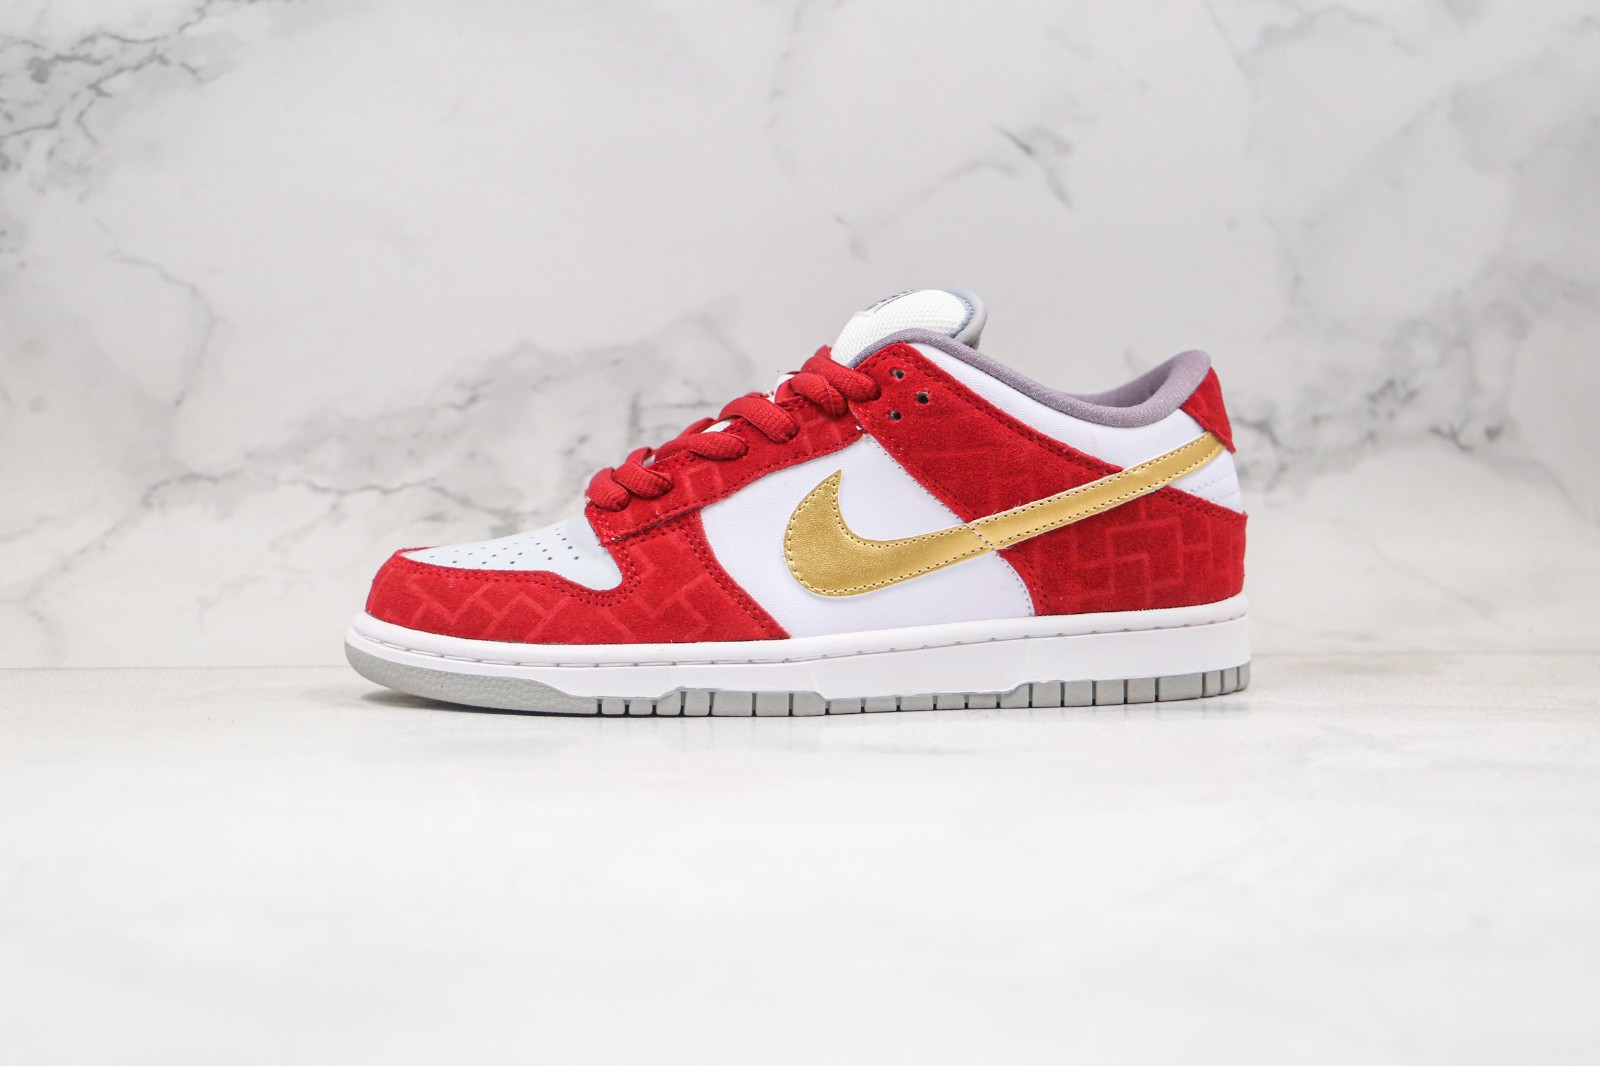 resterend Feest Poging 112 - nike id dunk high nfl draft picks 2019 by position -  MultiscaleconsultingShops - Nike SB Dunk Low Shanghai White Metallic Gold  Redwood 304292